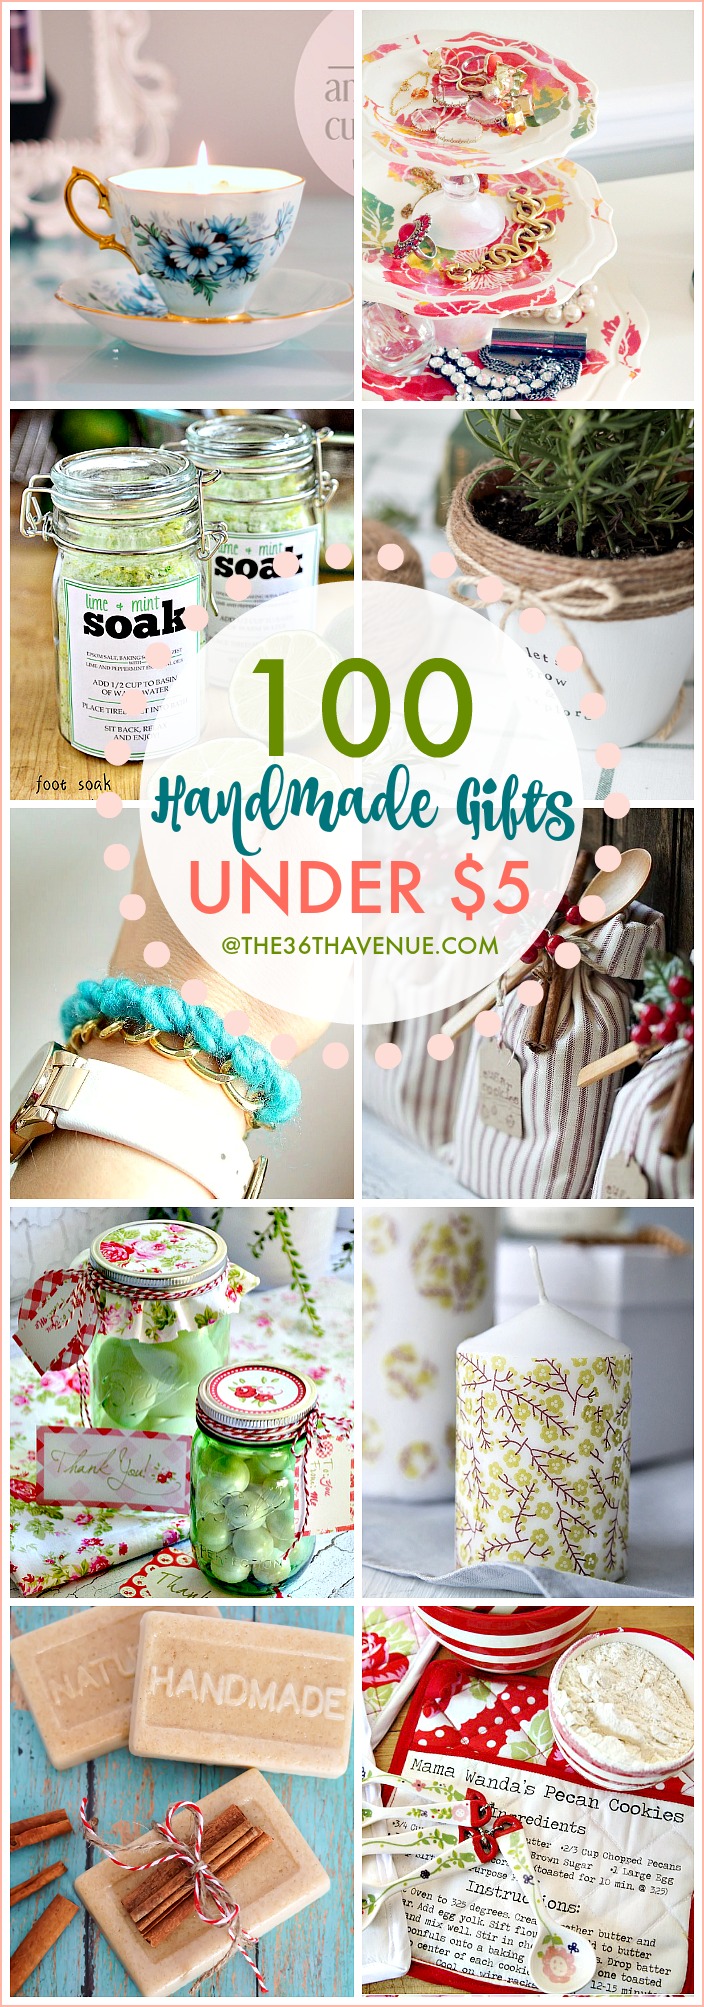 https://www.the36thavenue.com/wp-content/uploads/2015/10/Handmade-Gifts-Under-Five-Dollars-at-the36thavenue.com-.jpg